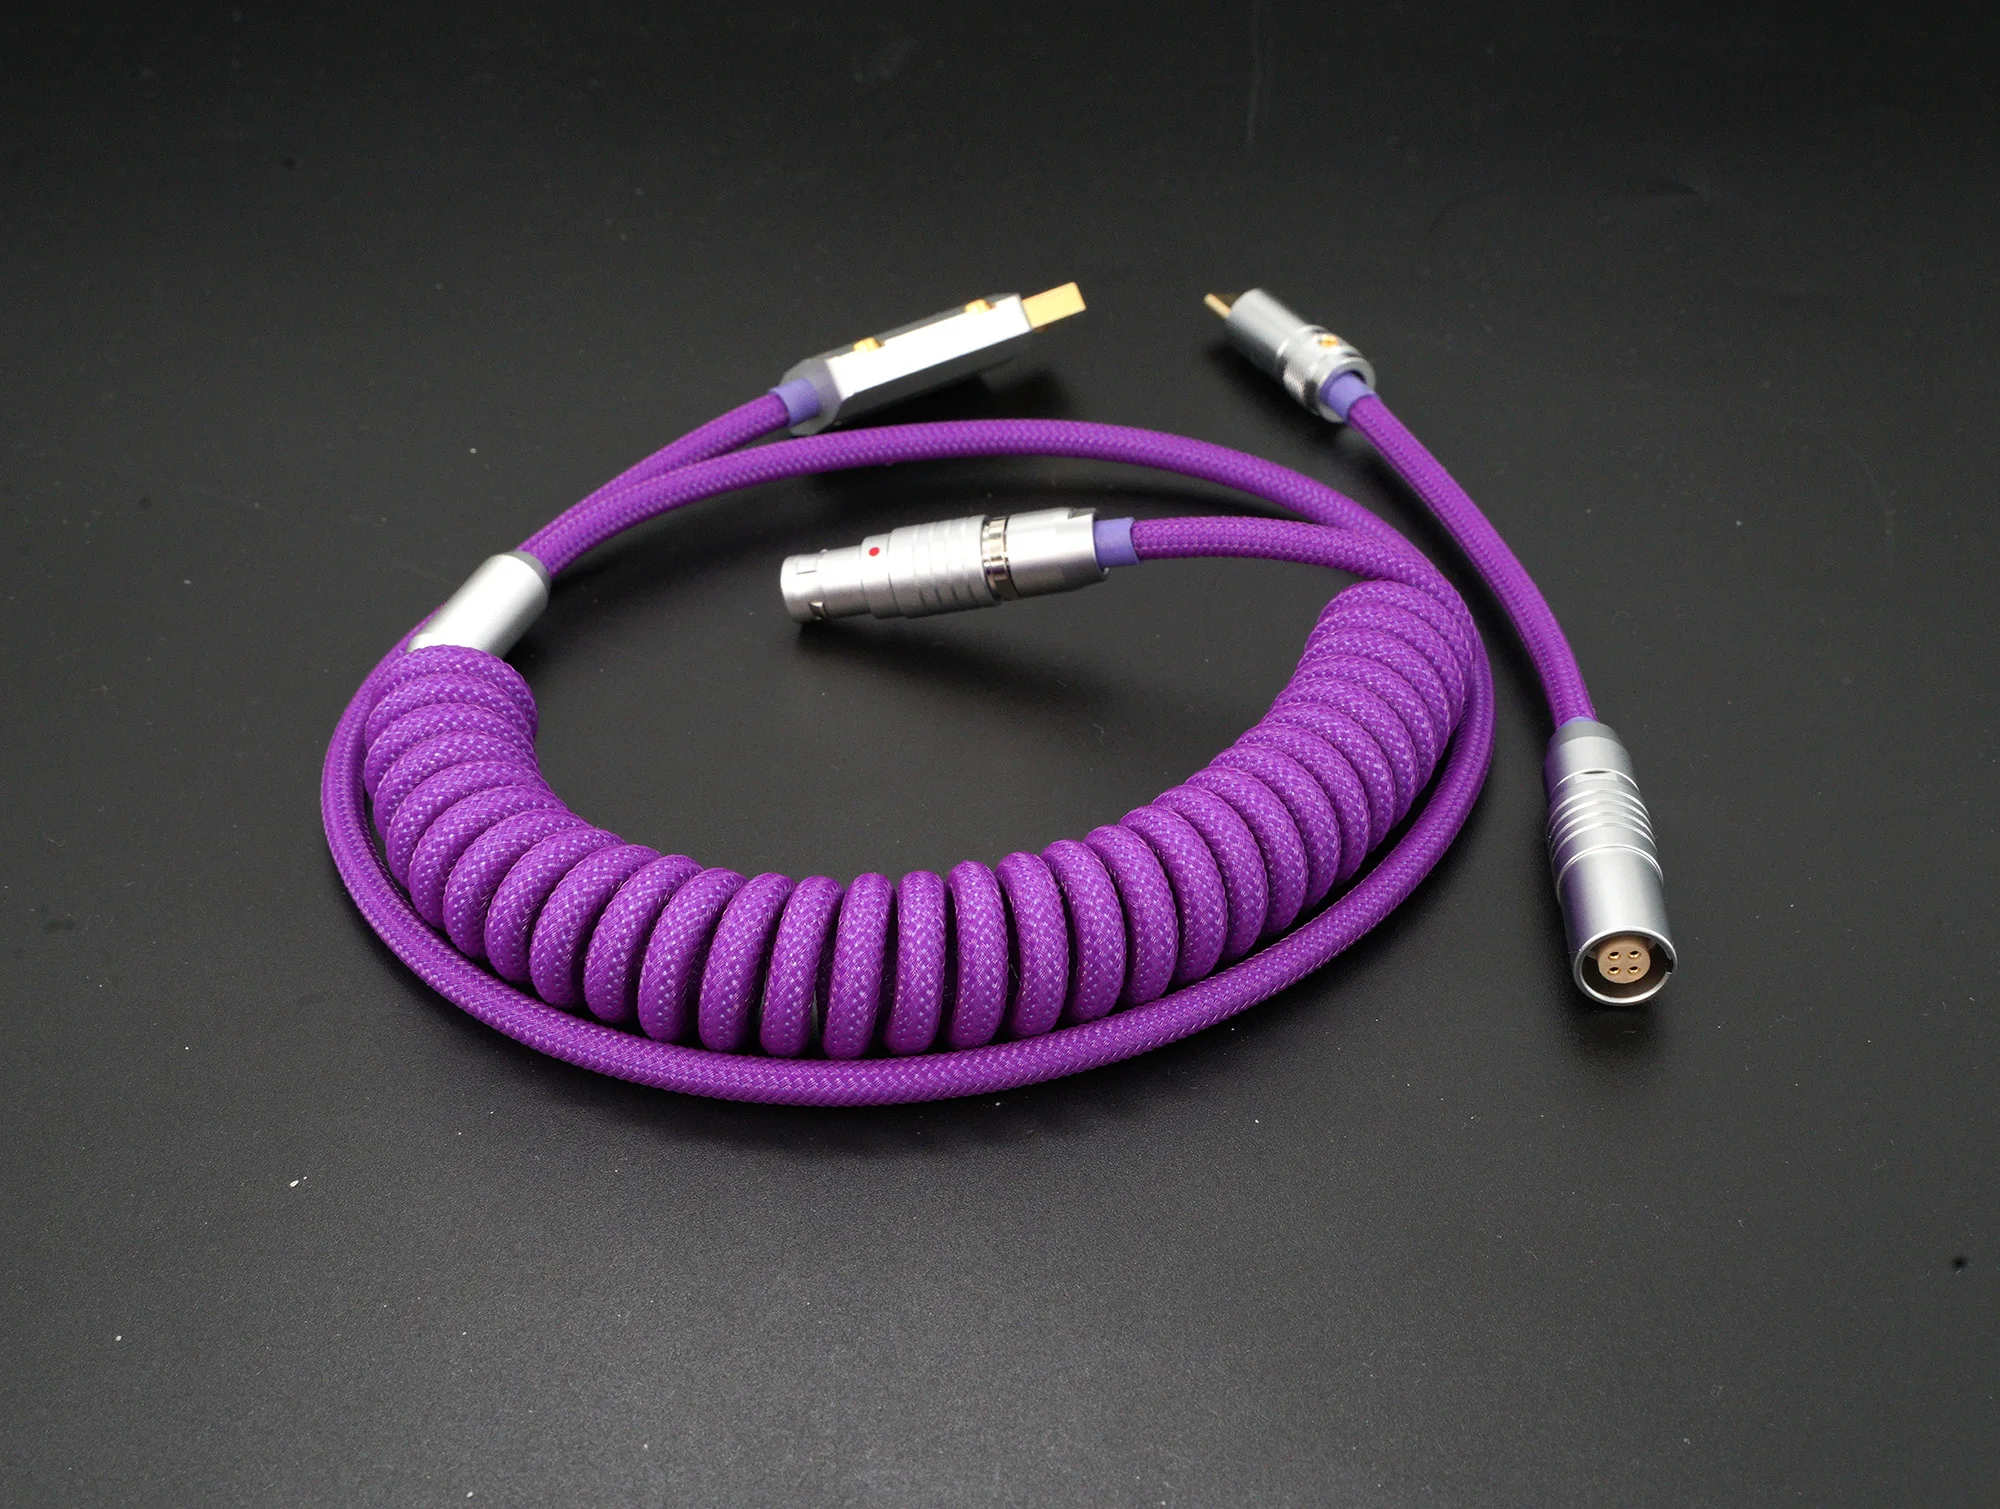 GeekCable Customized DIY Manual Pennefather Mechanical Keyboard Cable Data TypeC Braided Fluorescent Purple nylon Keyboard Cable